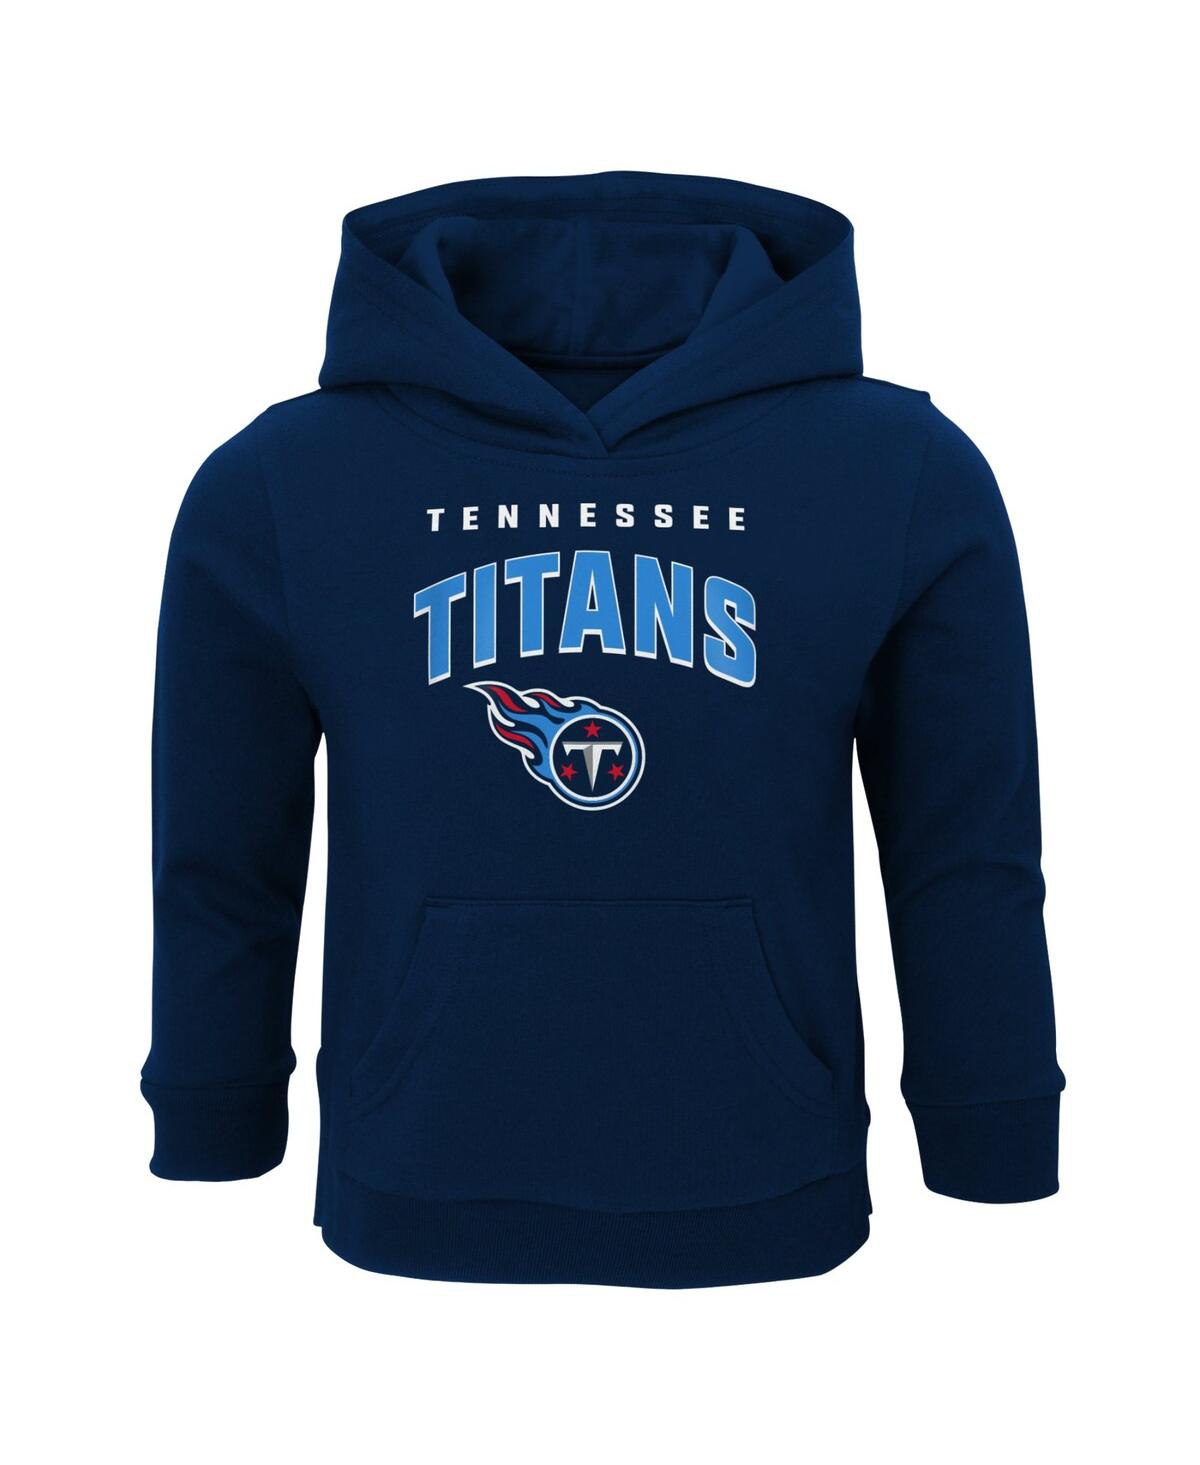 Shop Outerstuff Toddler Boys And Girls Navy Tennessee Titans Stadium Classic Pullover Hoodie